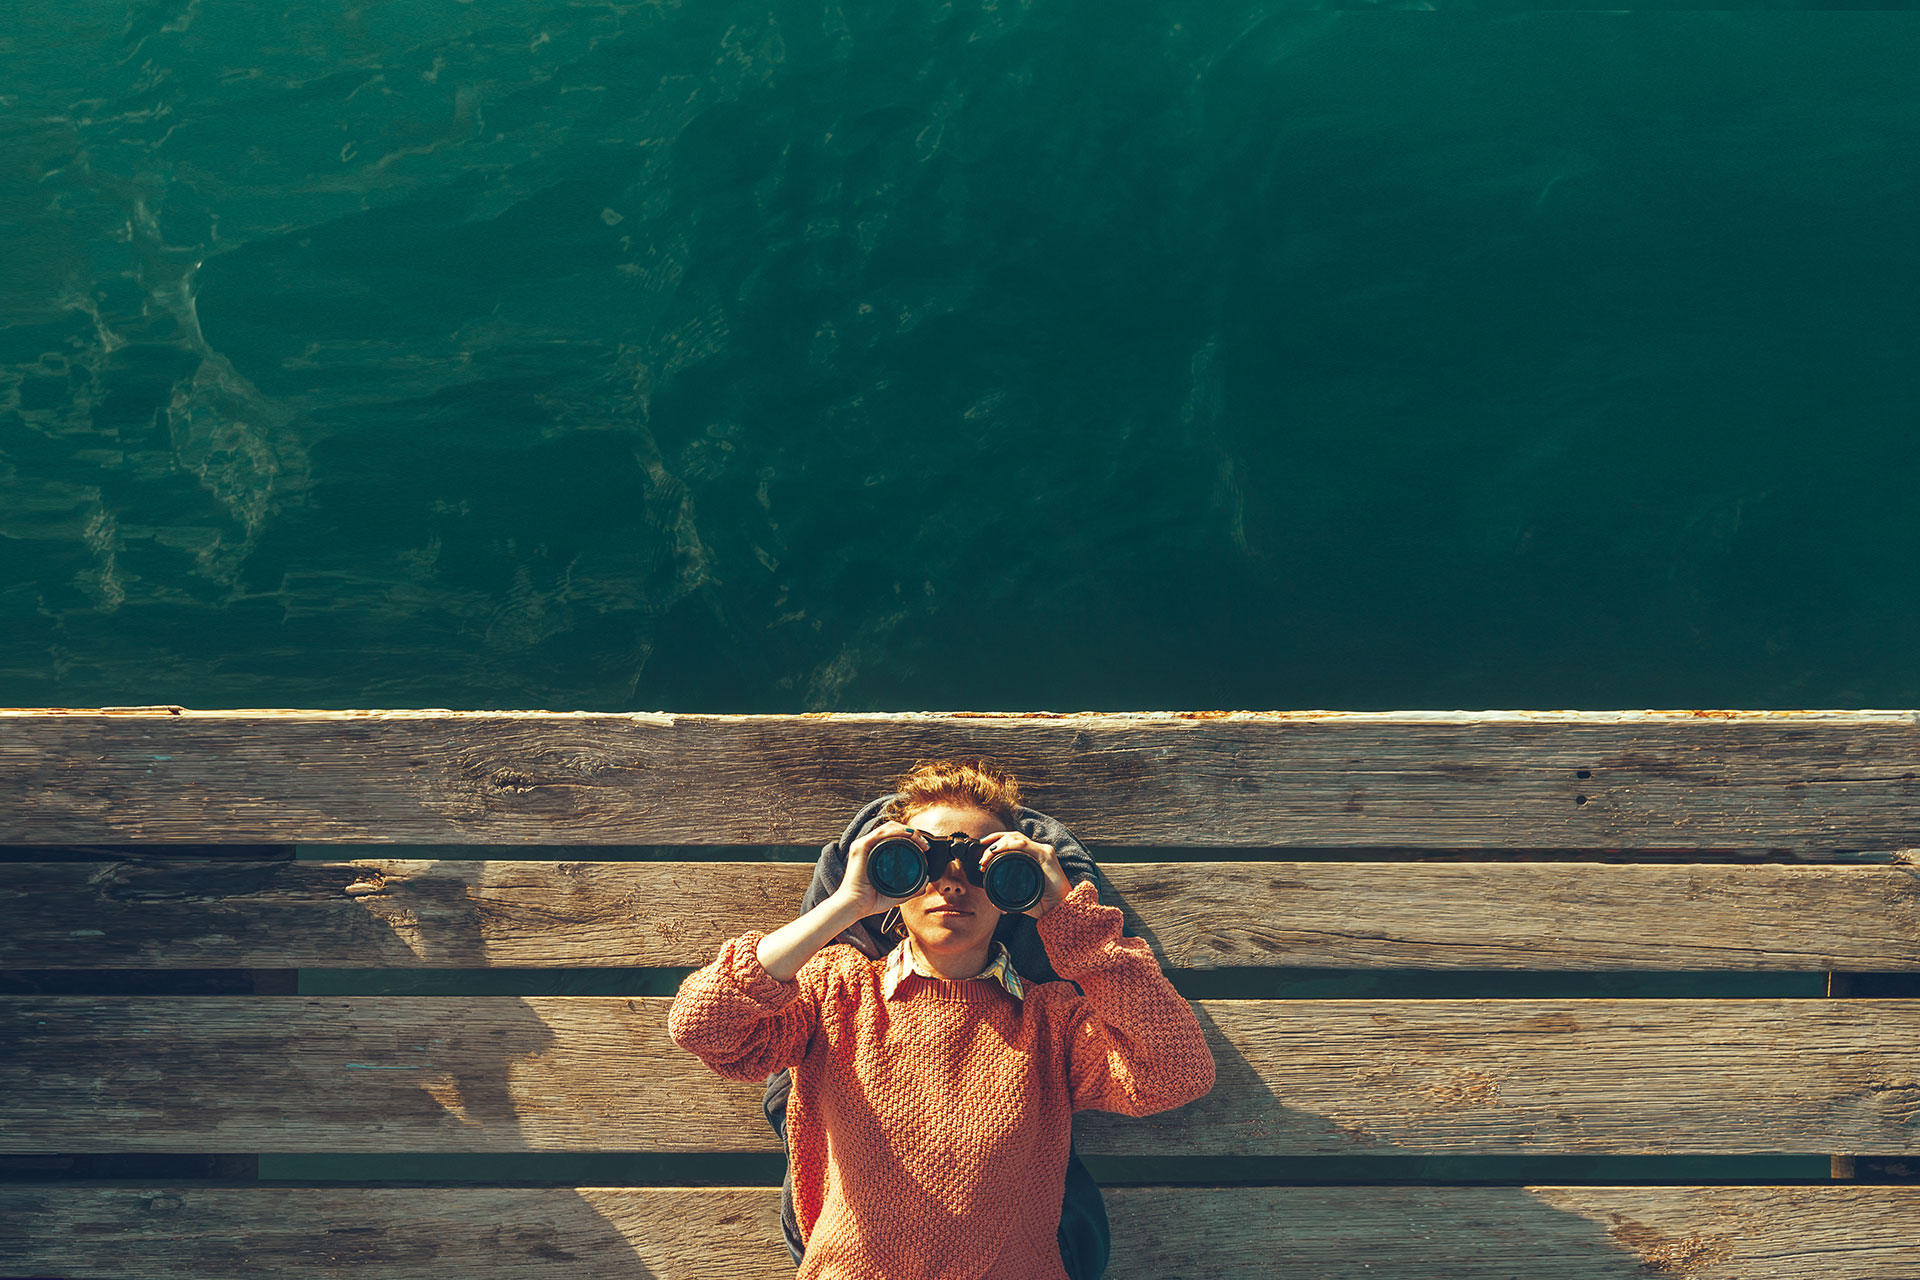 Top view of a person on a wooden pier, looking through binoculars, with clear green water below.